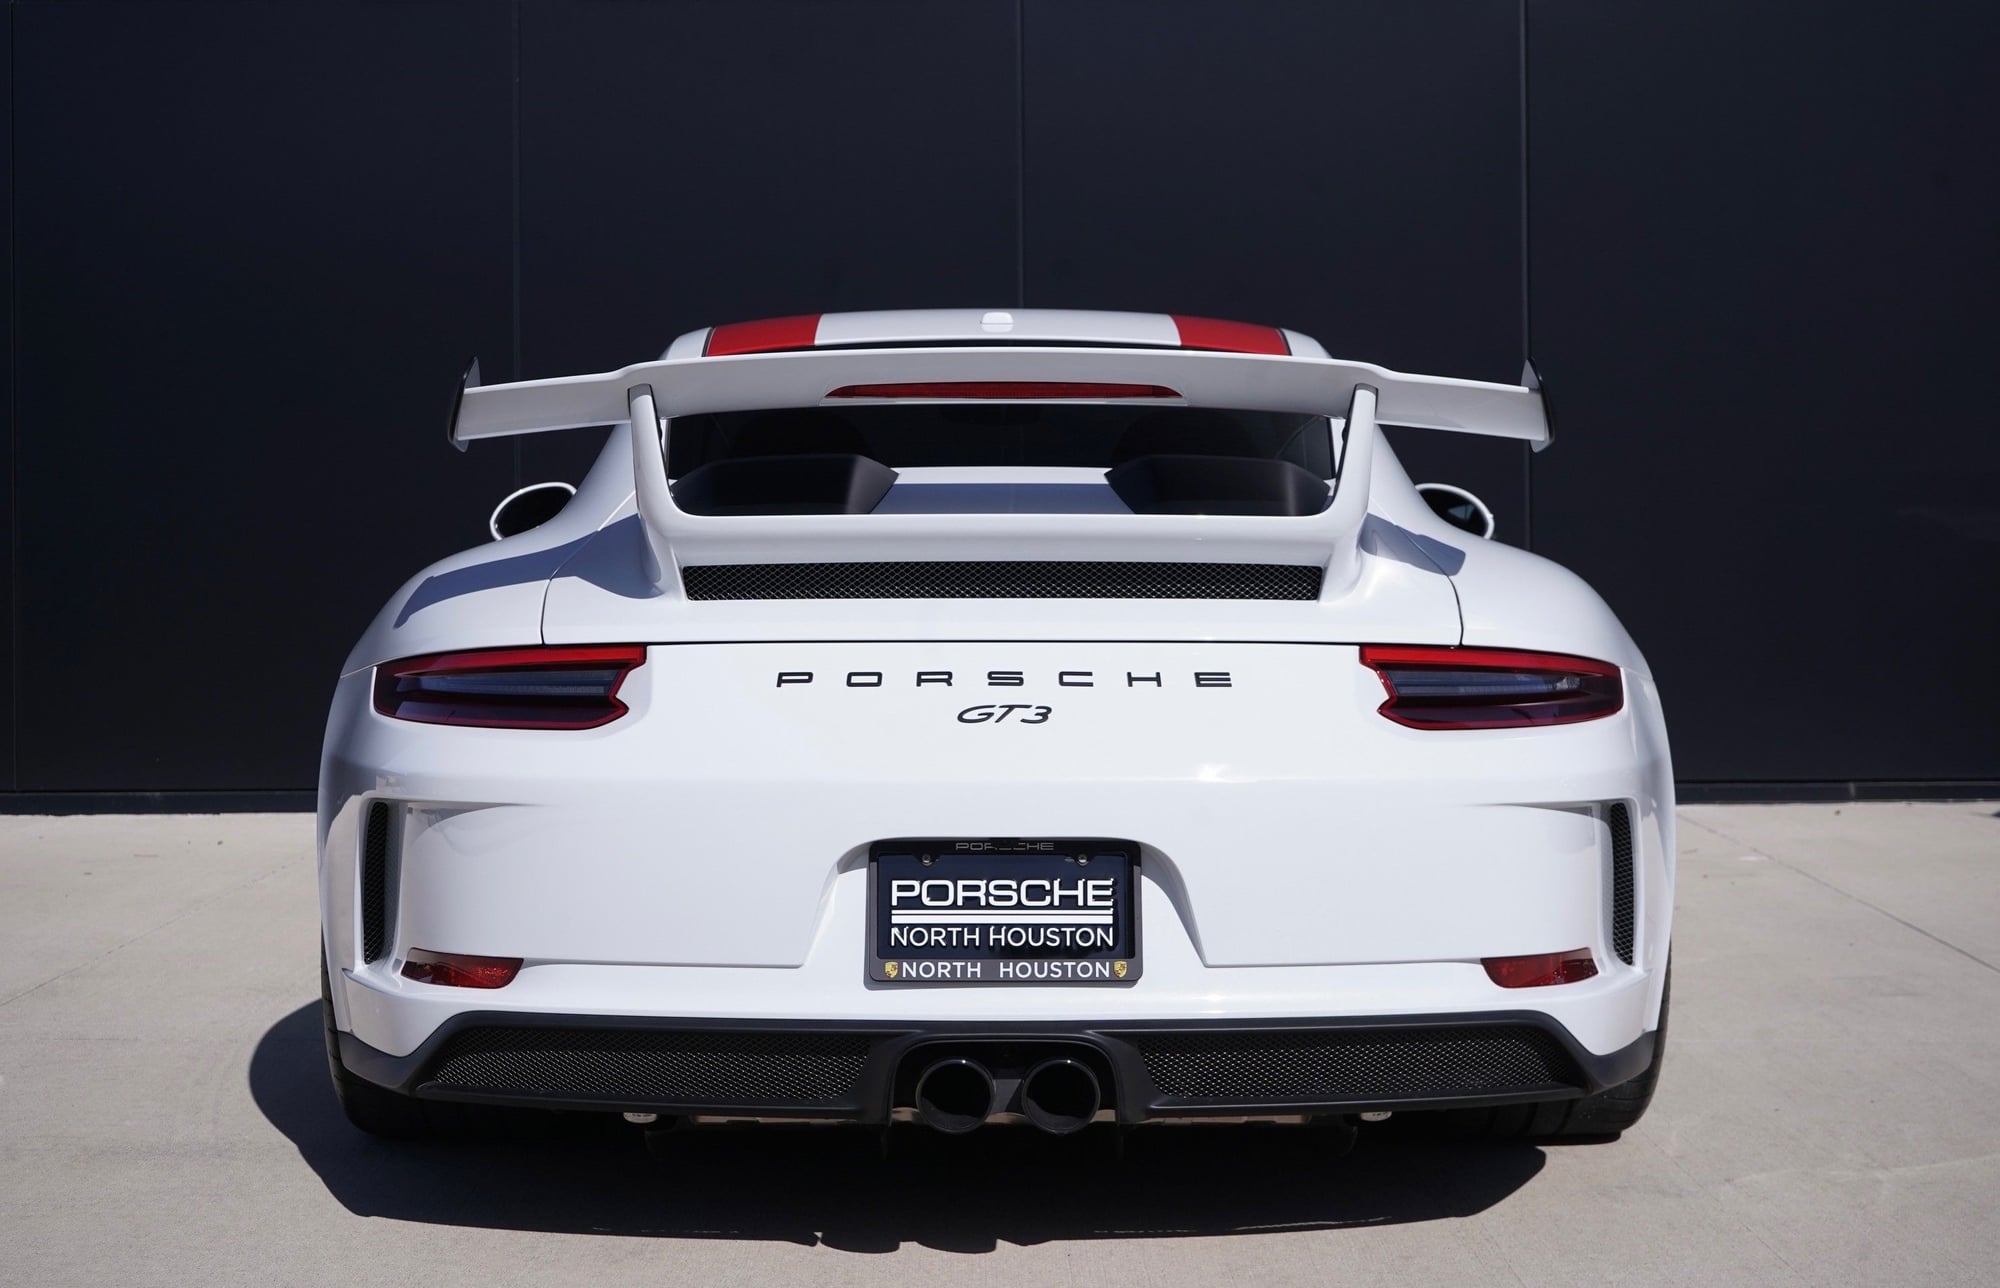 2018 Porsche GT3 - 2018 991.2 GT3 MT - Used - VIN WP0AC2A91JS175142 - 521 Miles - 6 cyl - 2WD - Manual - Coupe - White - Houston, TX 77090, United States